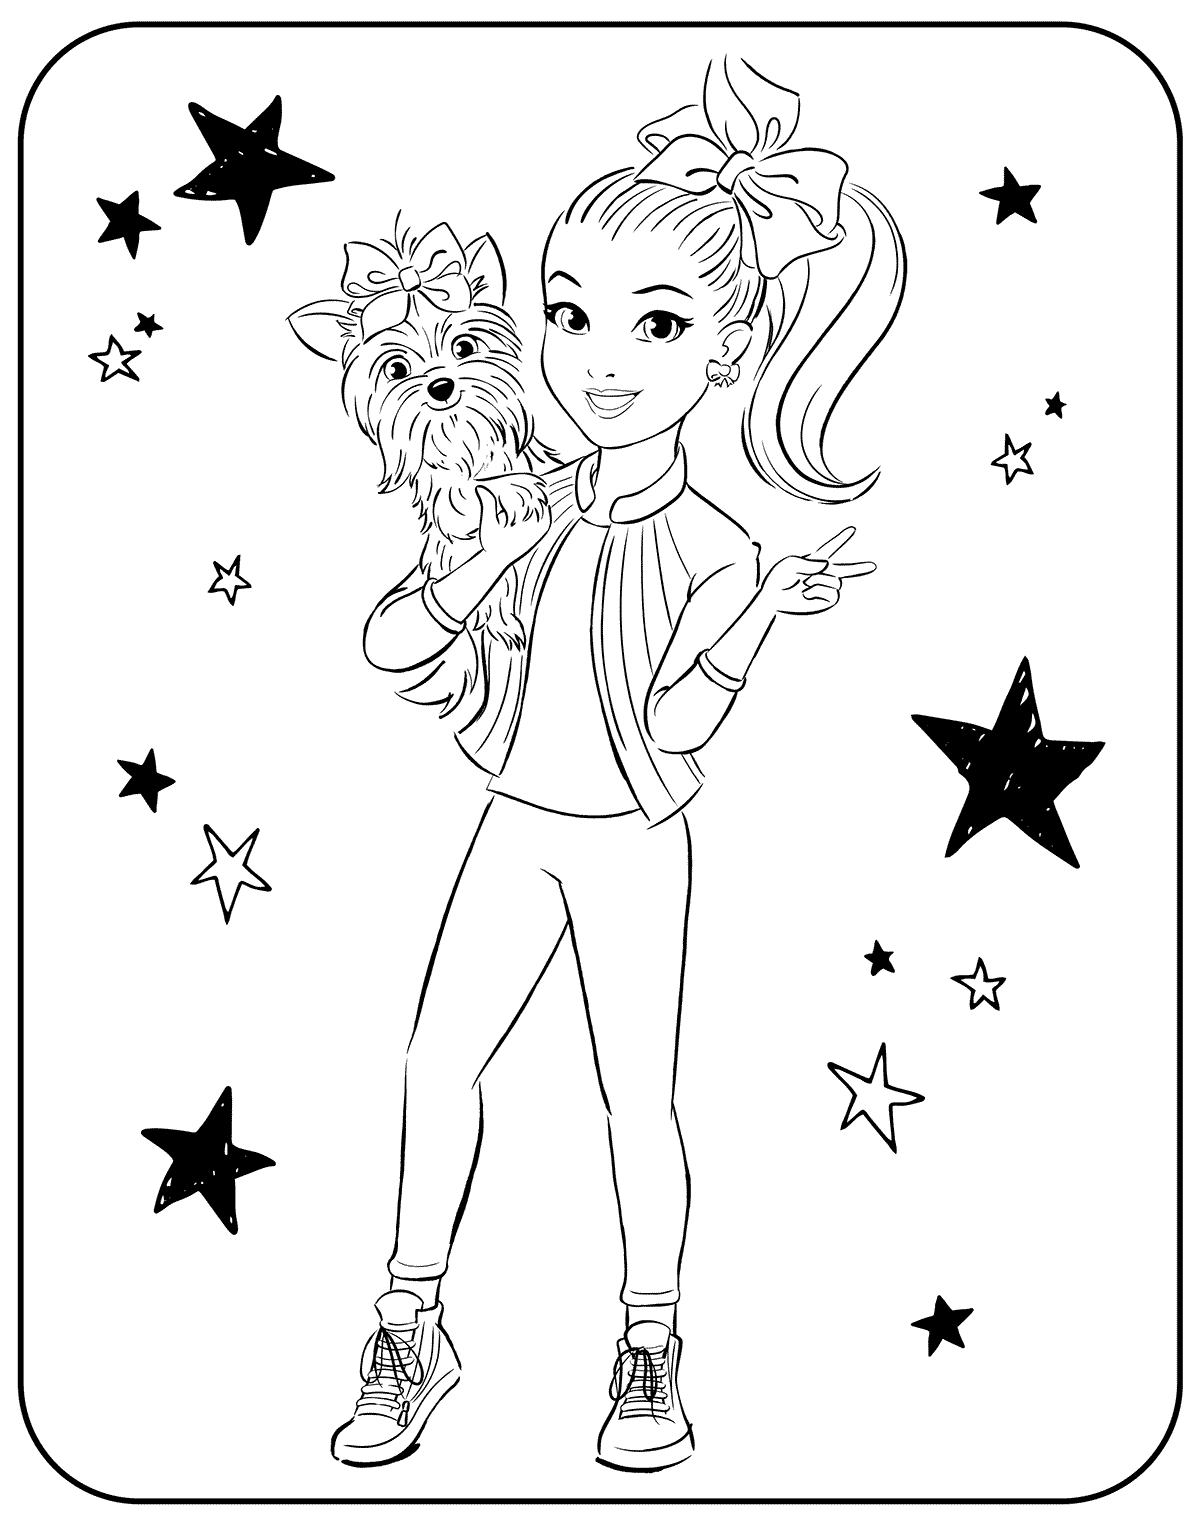 Active sport Bow Bow and Jojo Siwa play together Coloring Pages